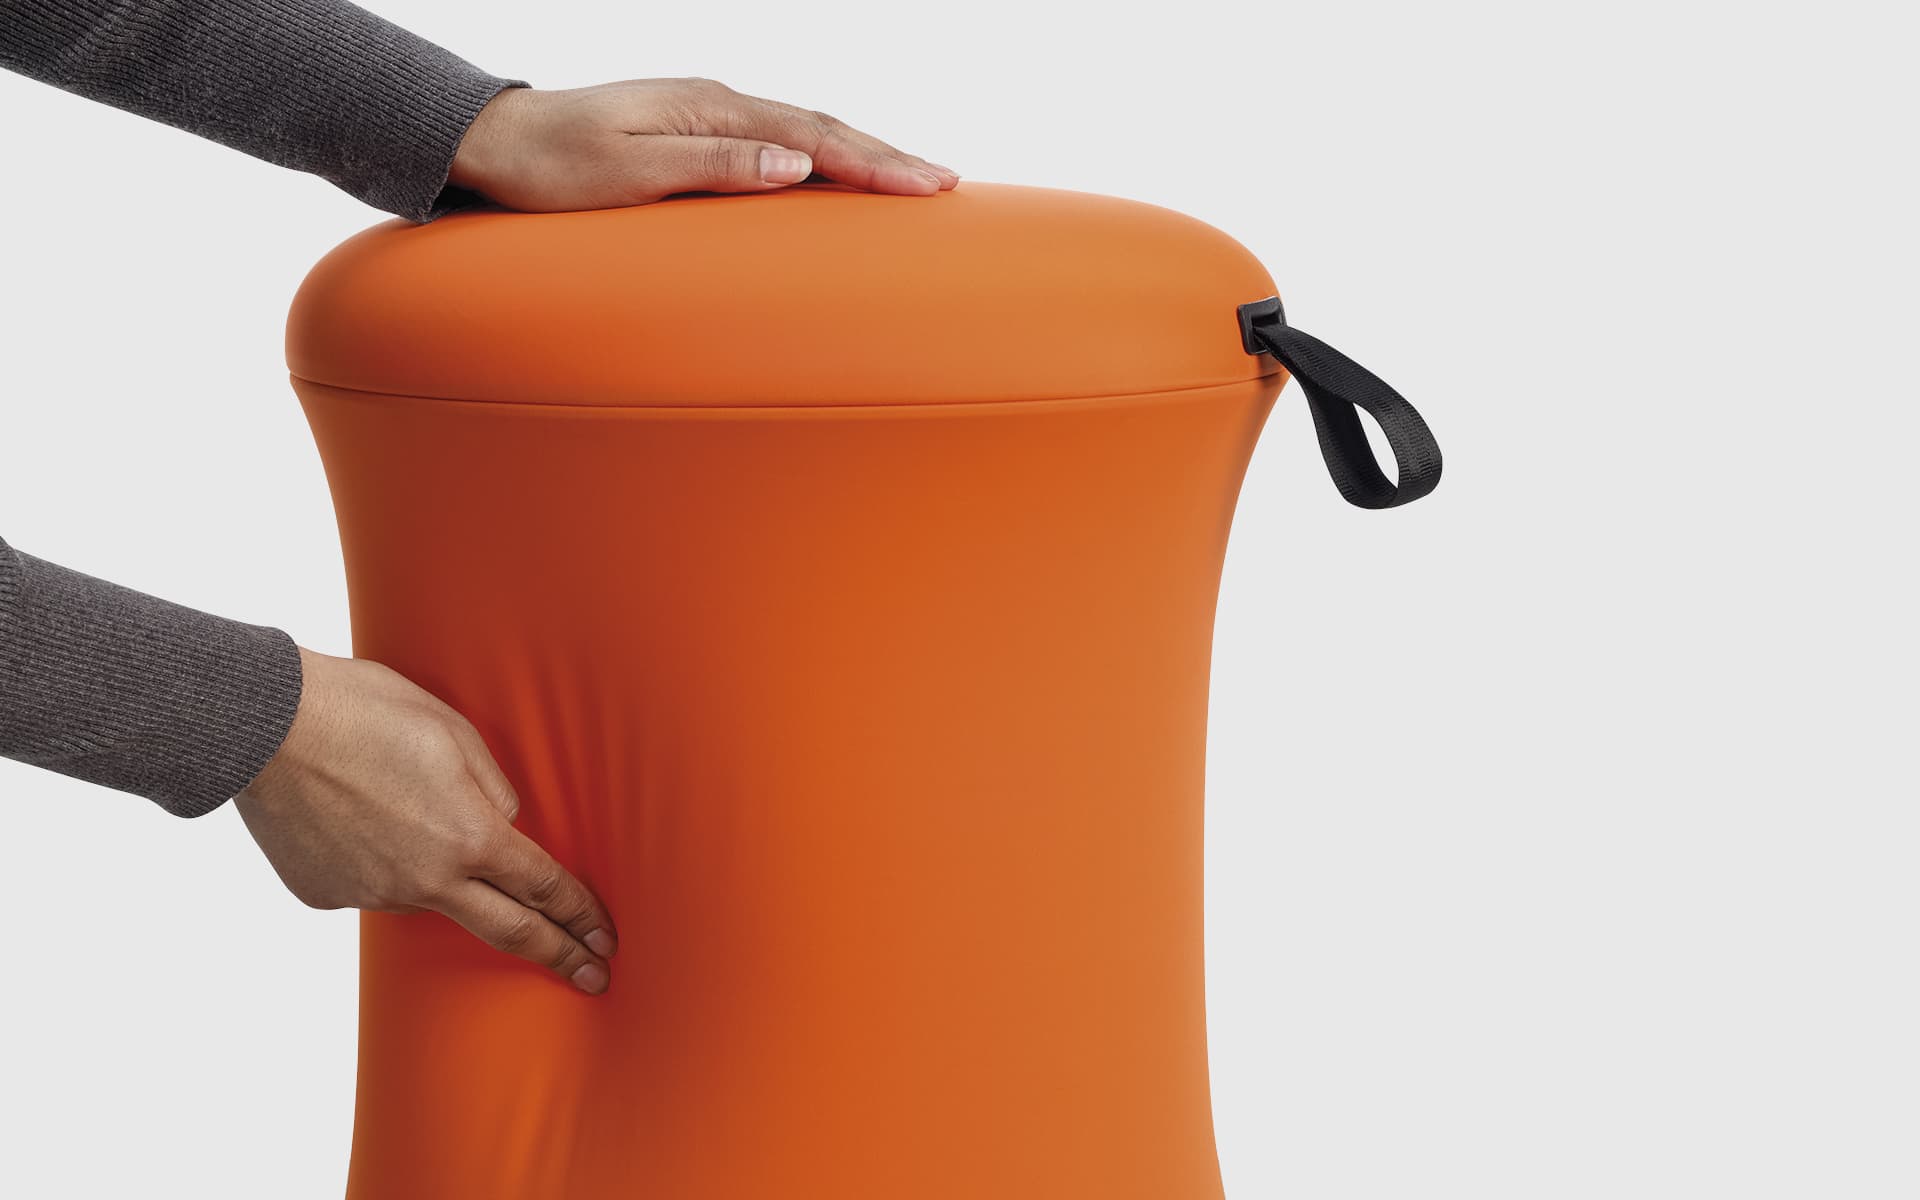 Close-up of hands touching an orange UE Furniture Uebobo stool by ITO Design